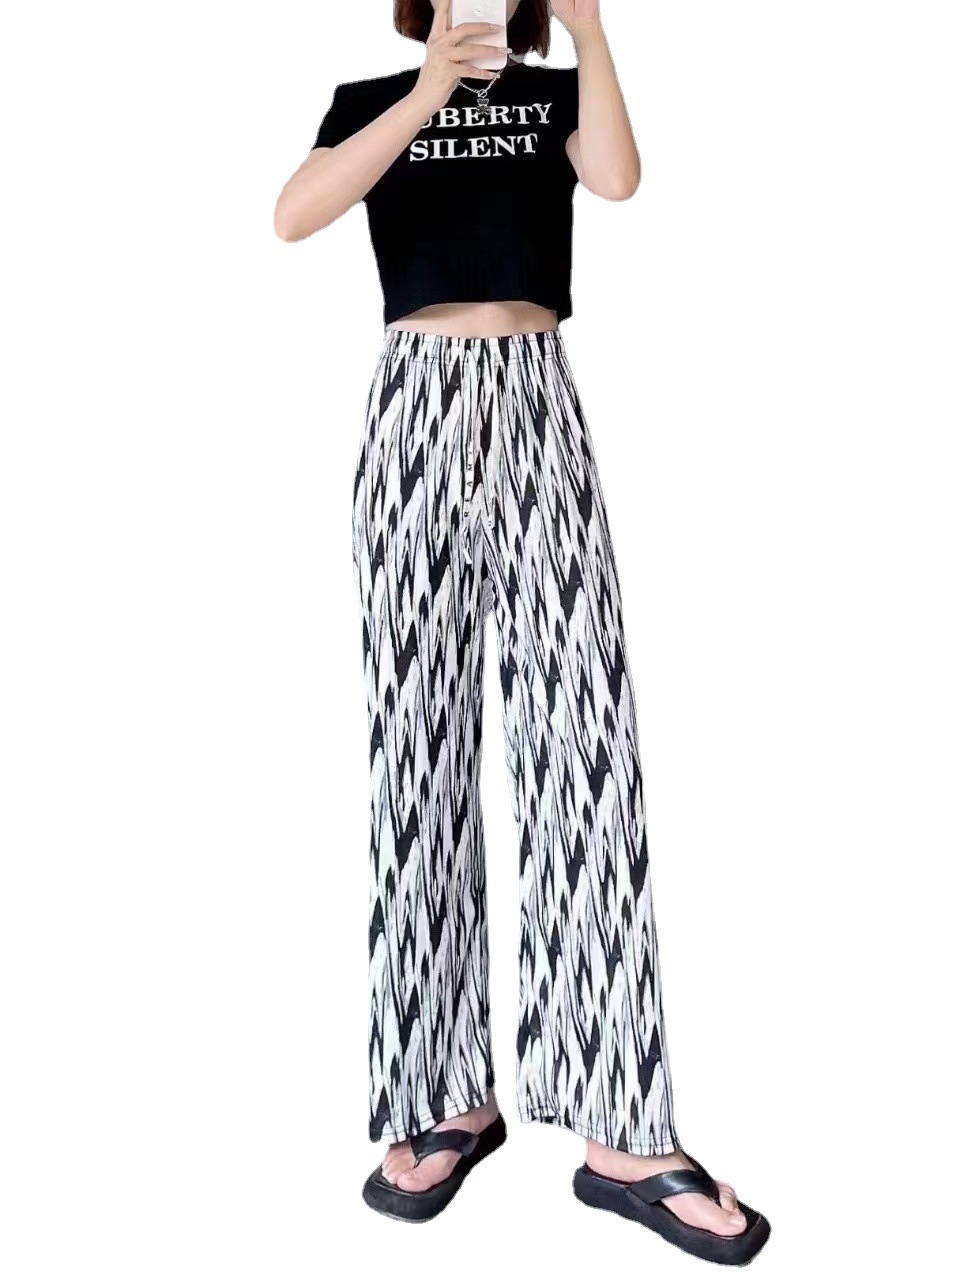 2023 Spring and Summer New Women's Wide-Leg Pants Ice Silk Retro Style Wide Leg Pants High Waist Casual Straight Pants Mop Pants